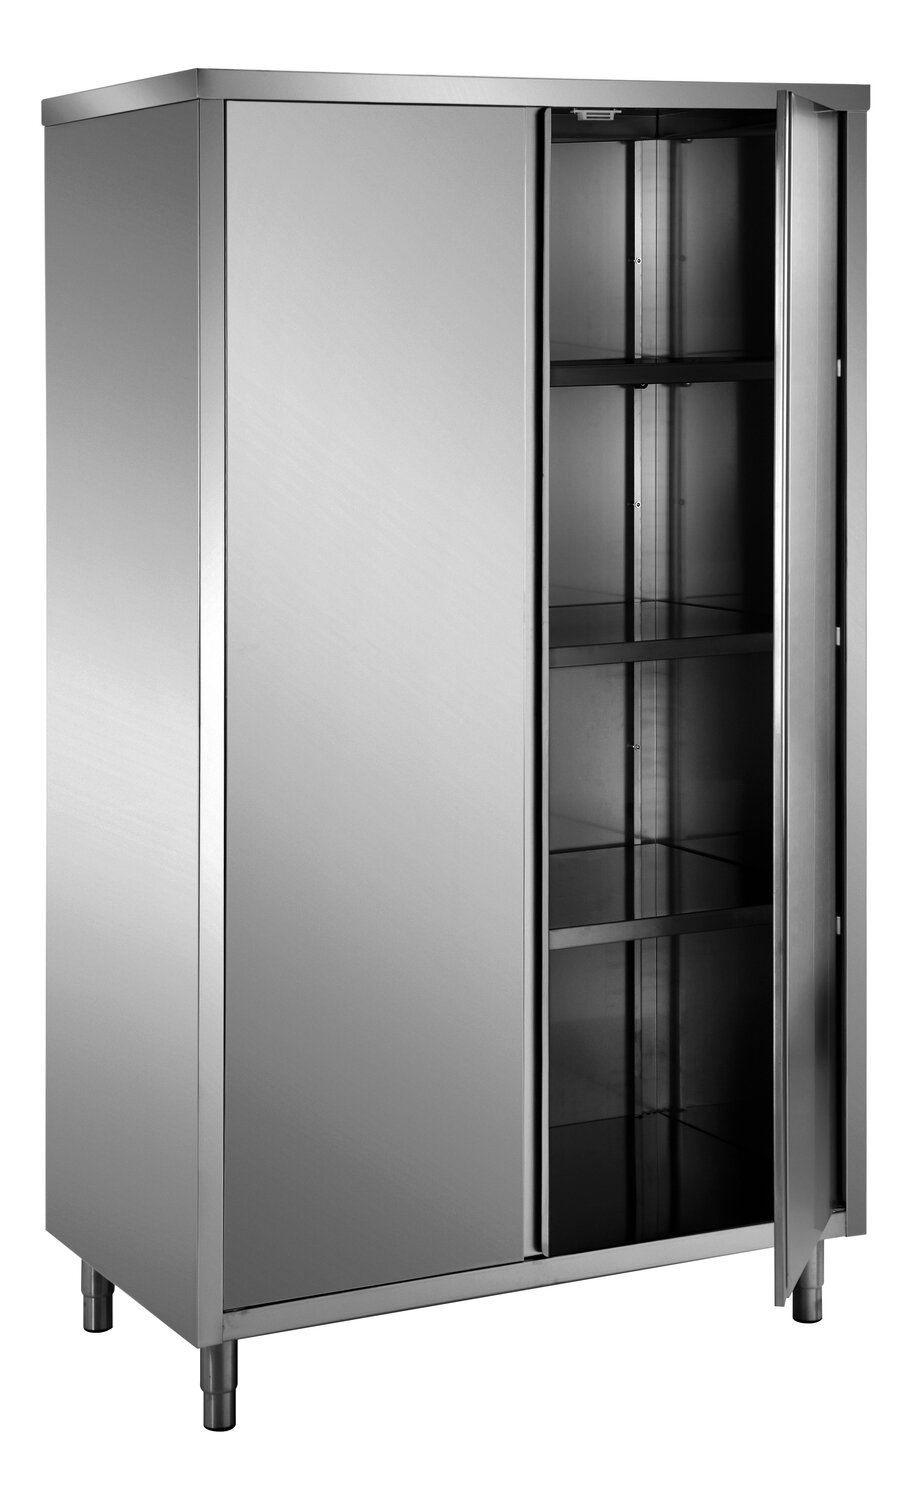 SARO Stainless steel storage cabinets with 2 hinged doors 1200x700 AISI 430